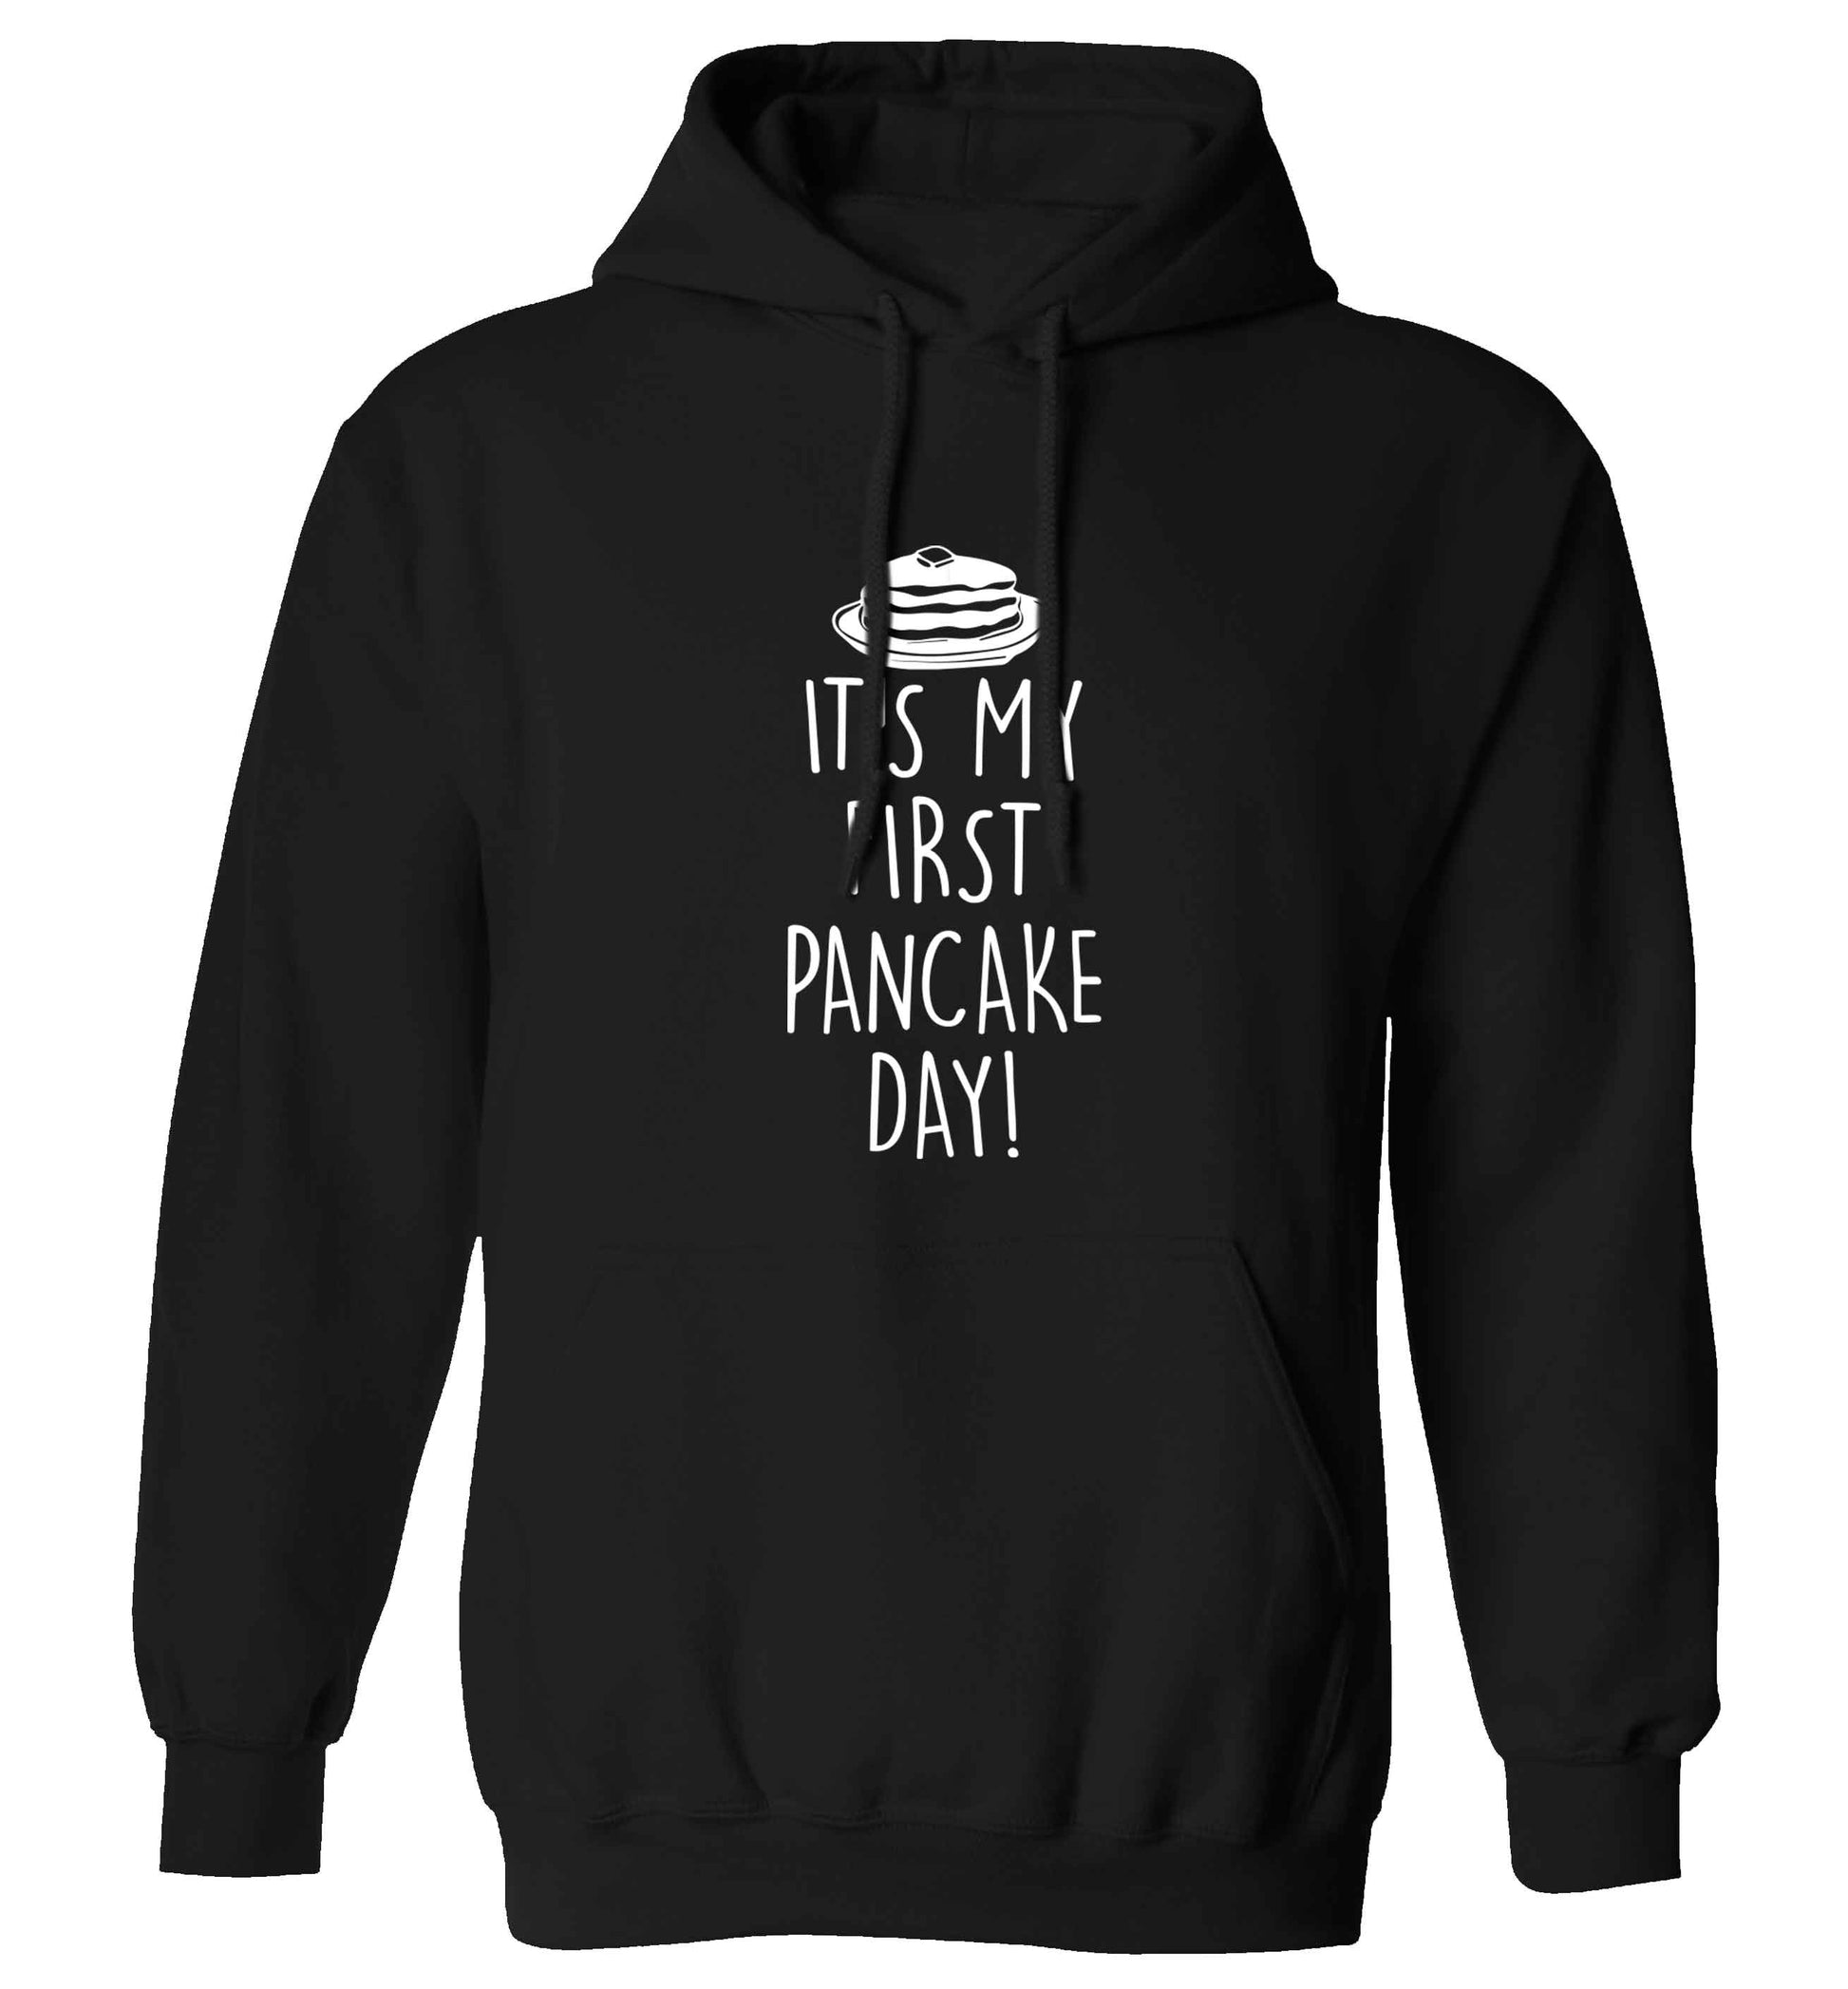 It's my first pancake day adults unisex black hoodie 2XL